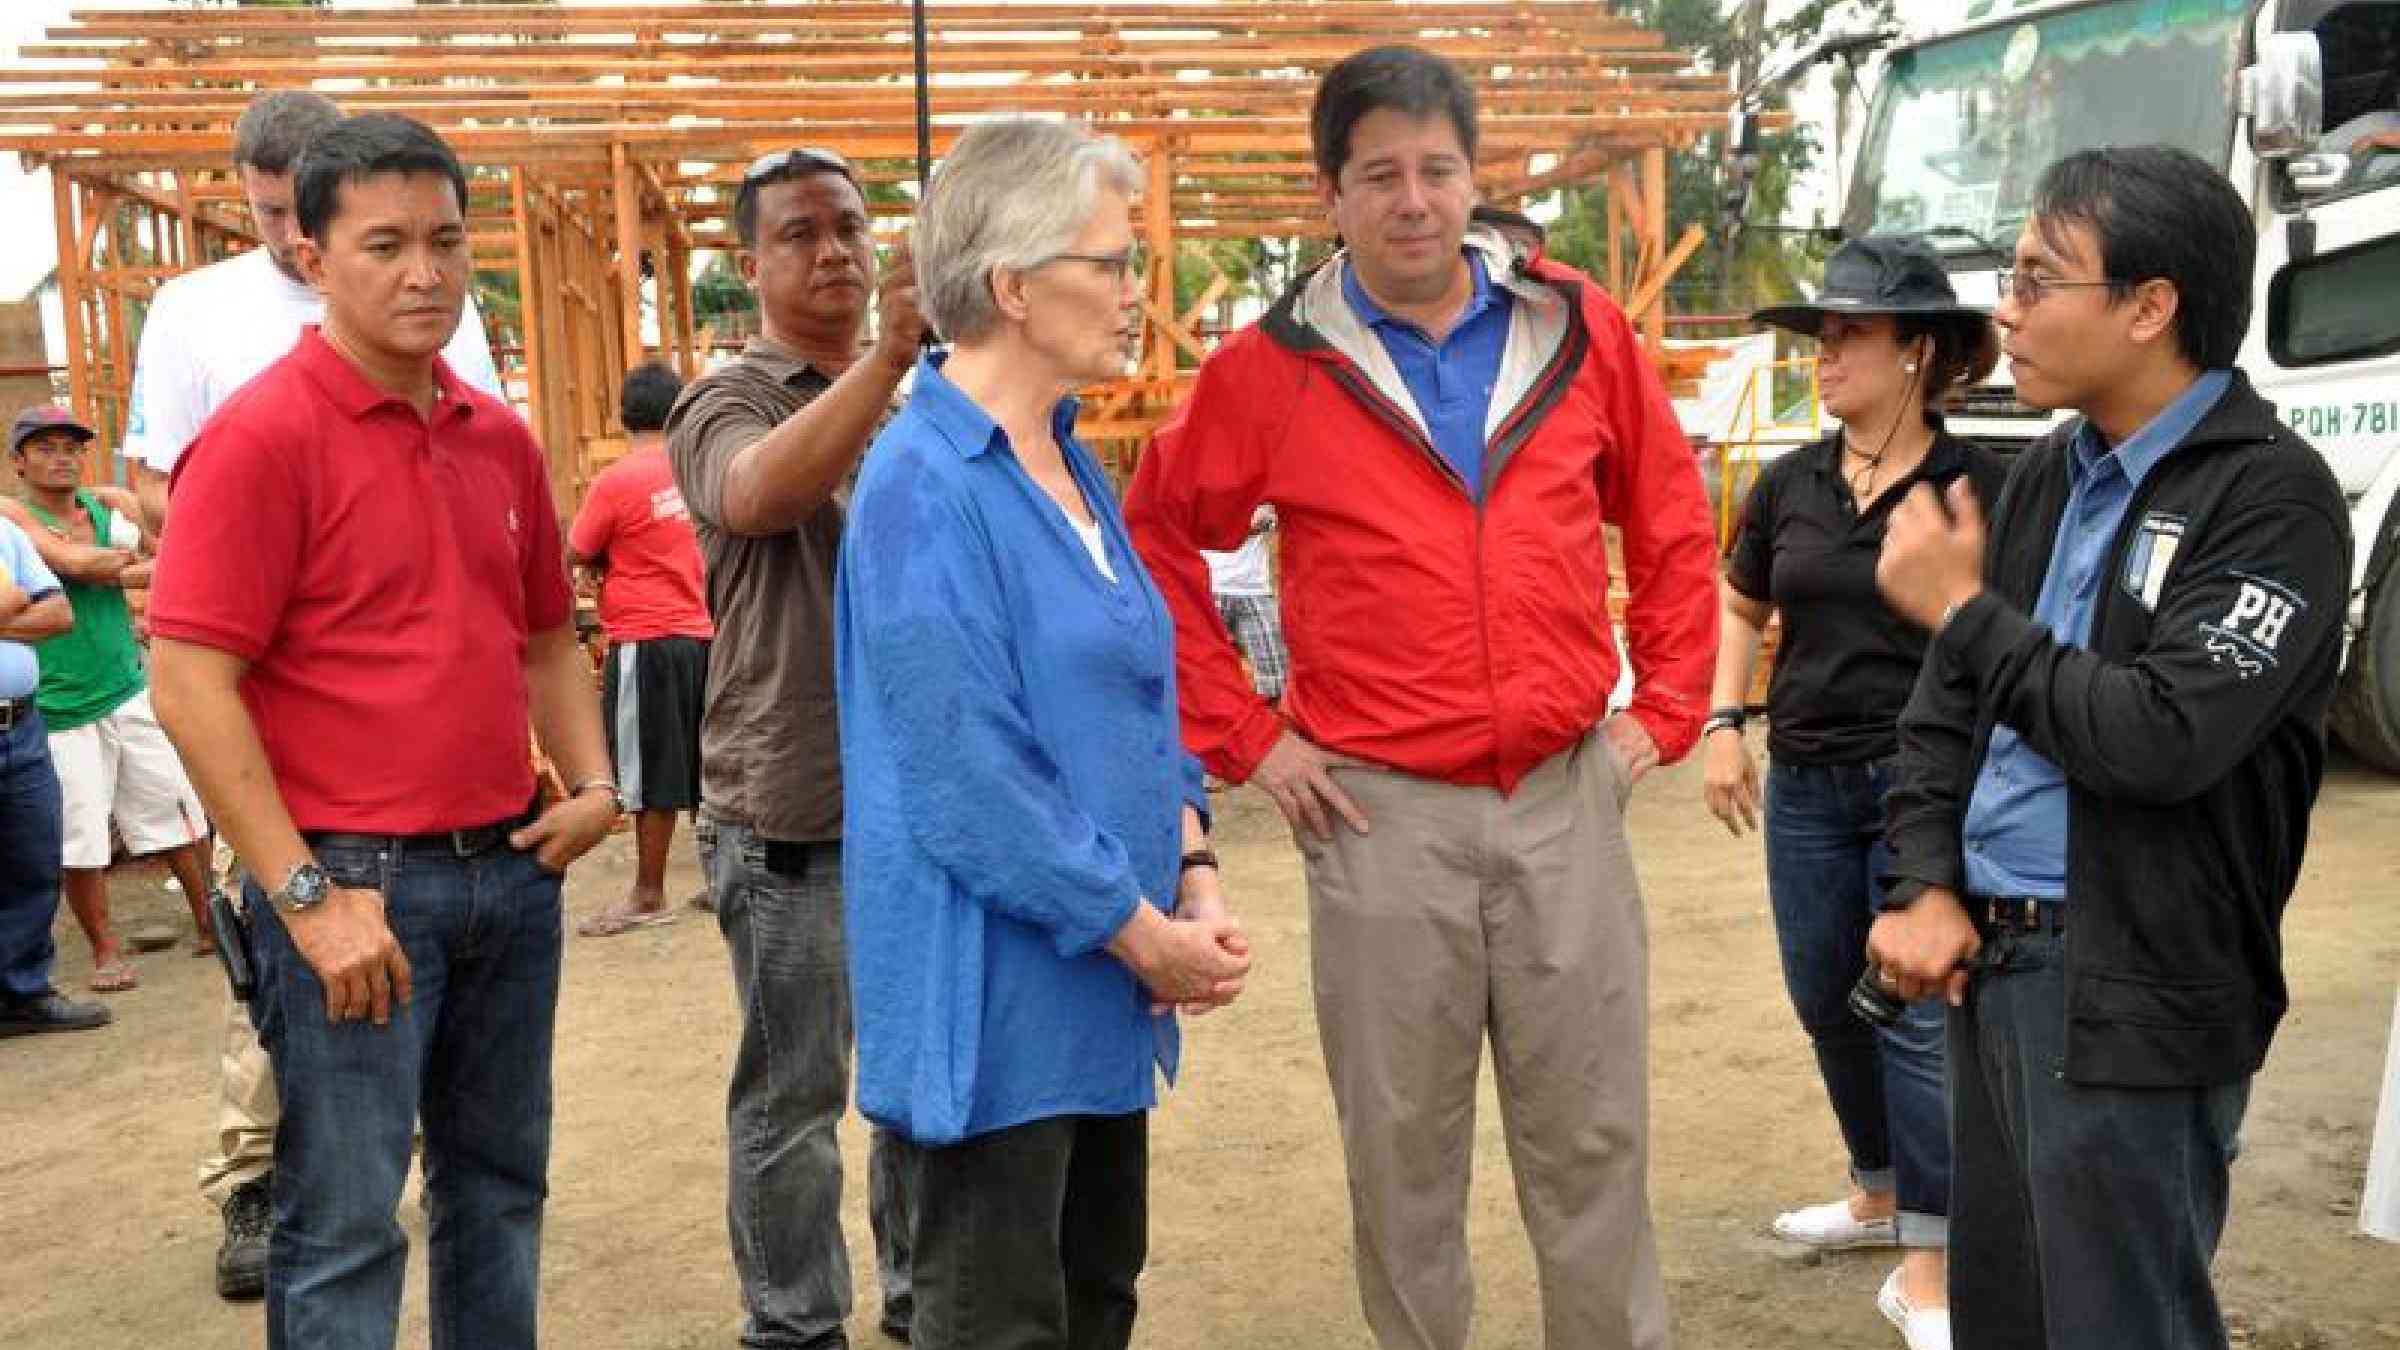 Yeb Saño discusses opportunities for resilient recovery at a transitional shelter site with Tacloban Mayor Mr Alfred Romualdez and the UN Secretary-General’s Special Representative for Disaster Risk Reduction, Ms Margareta Wahlström.